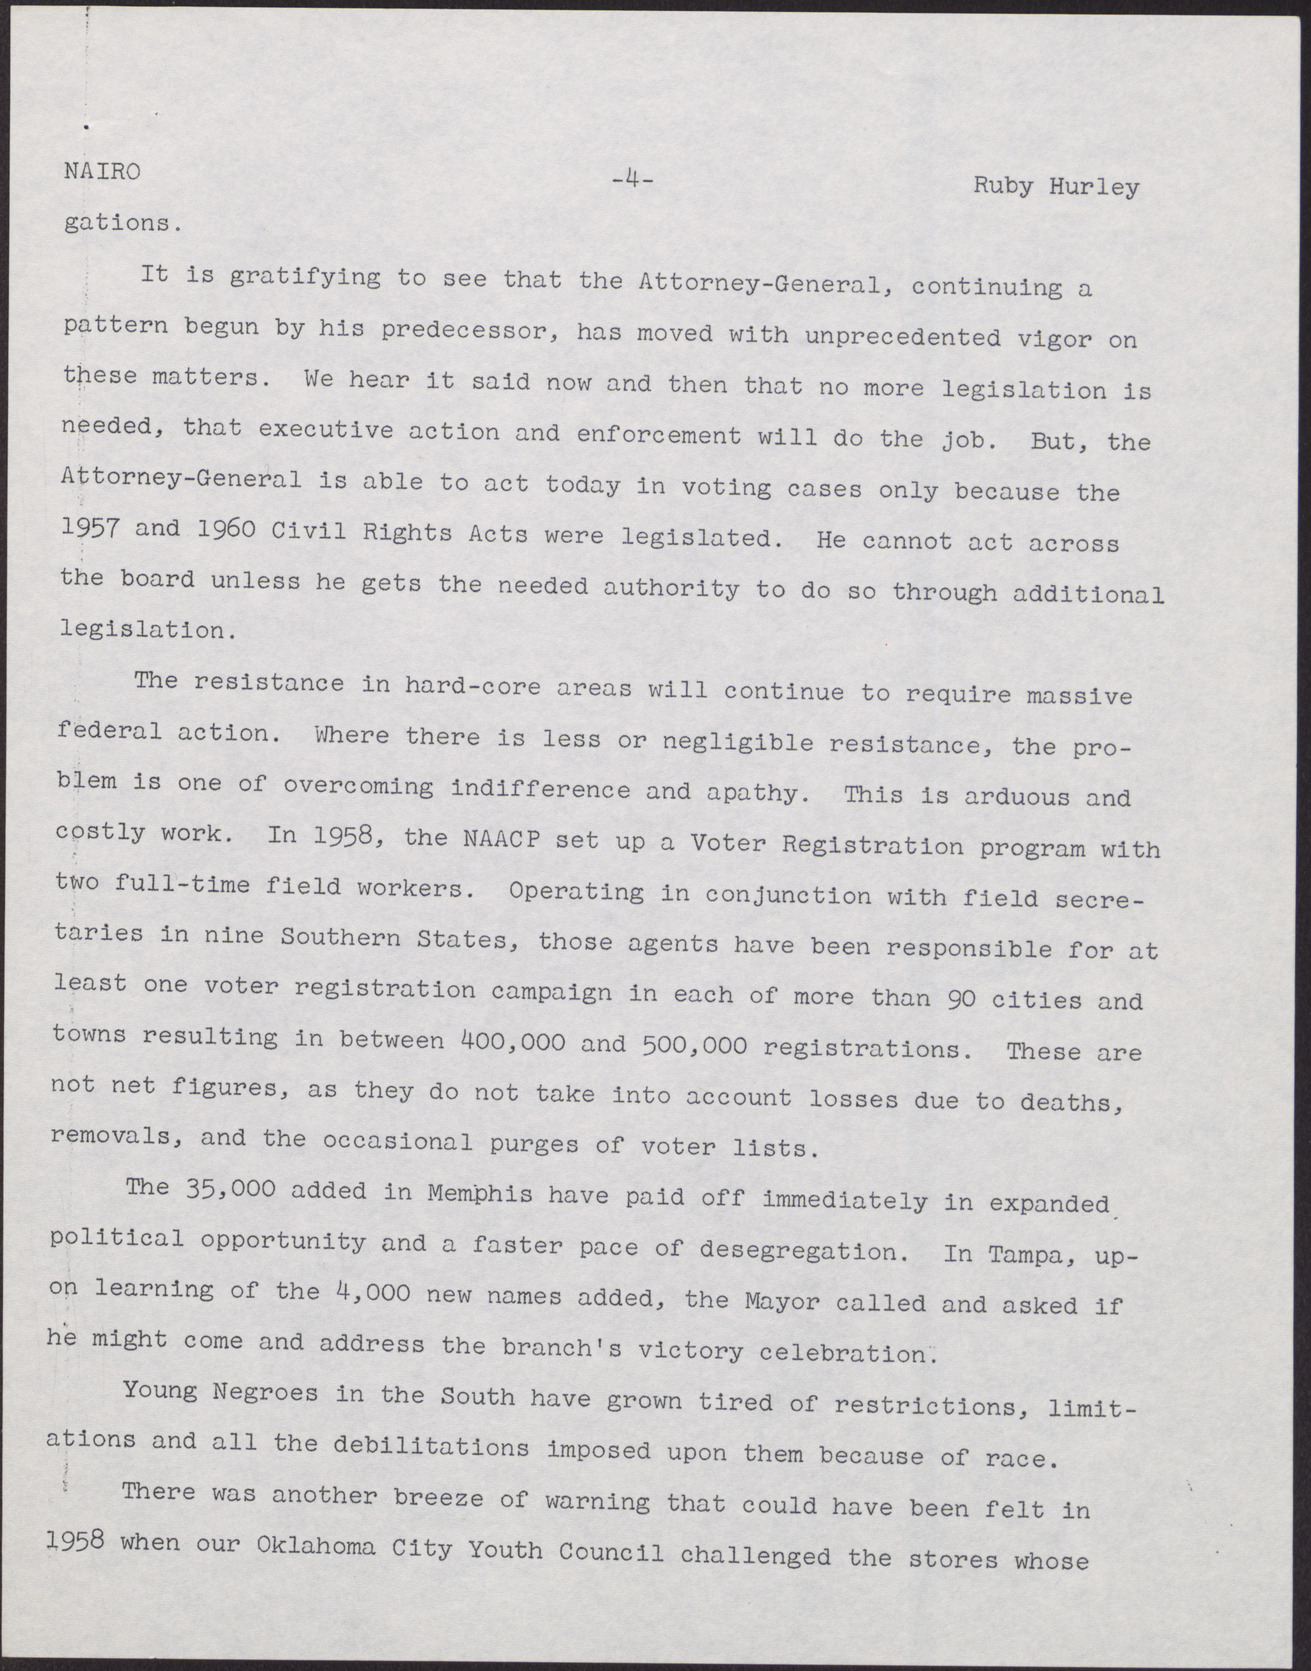 Paper for NAIRO Conference (7 pages), November 10, 1961, page 4